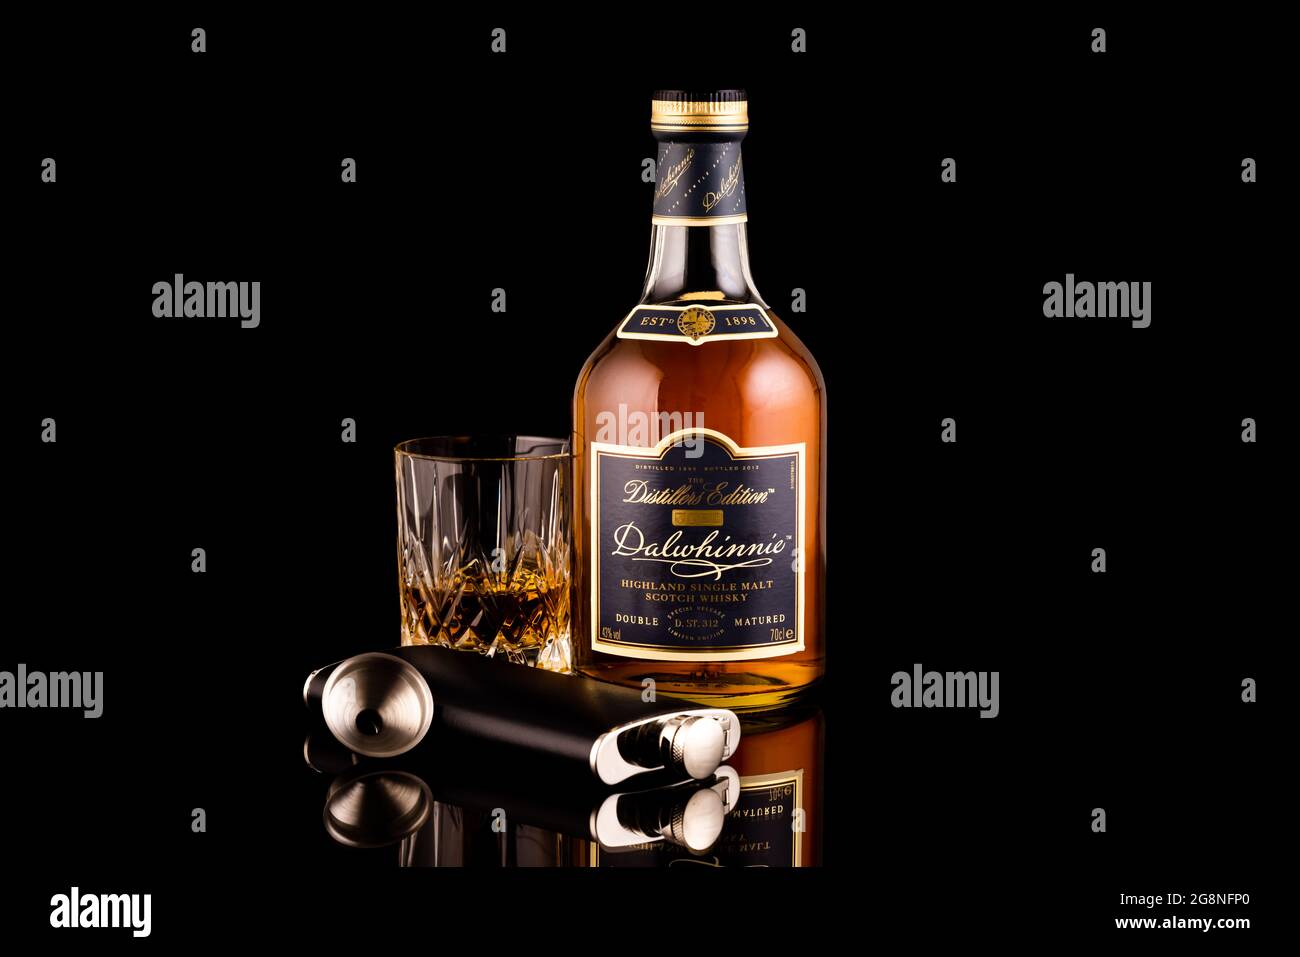 LISSE, THE NETHERLANDS - JULY 15, 2021: Dalwhinnie Distillers Edition bottle and a glass and black hip flask of scotch single malt whisky on a reflect Stock Photo